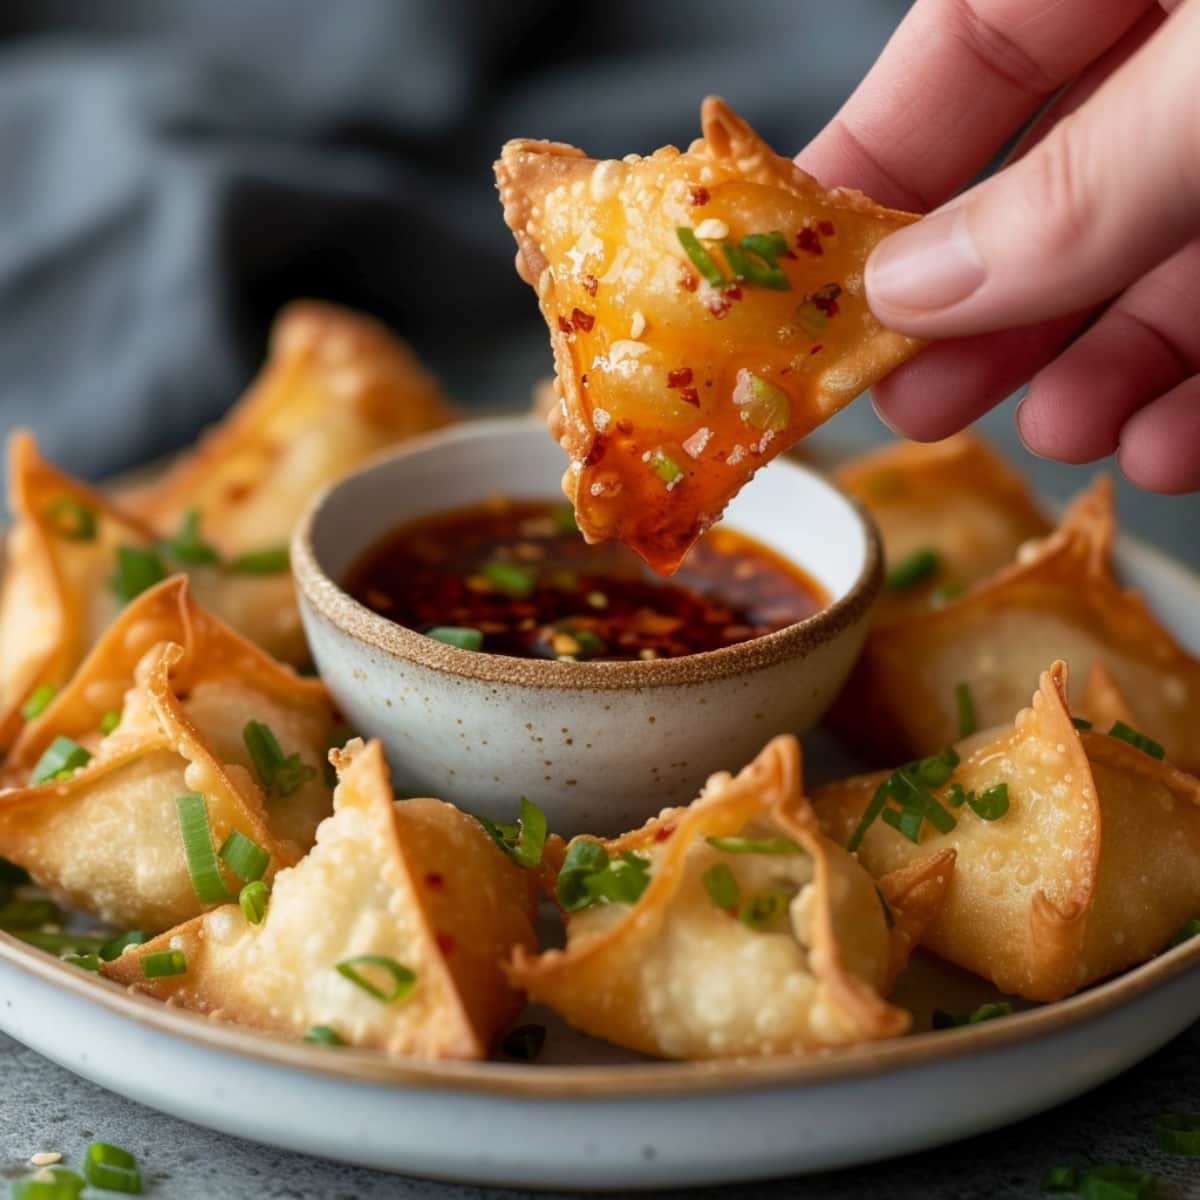 A hand dipping a crab rangoon into a bowl of sweet chili sauce